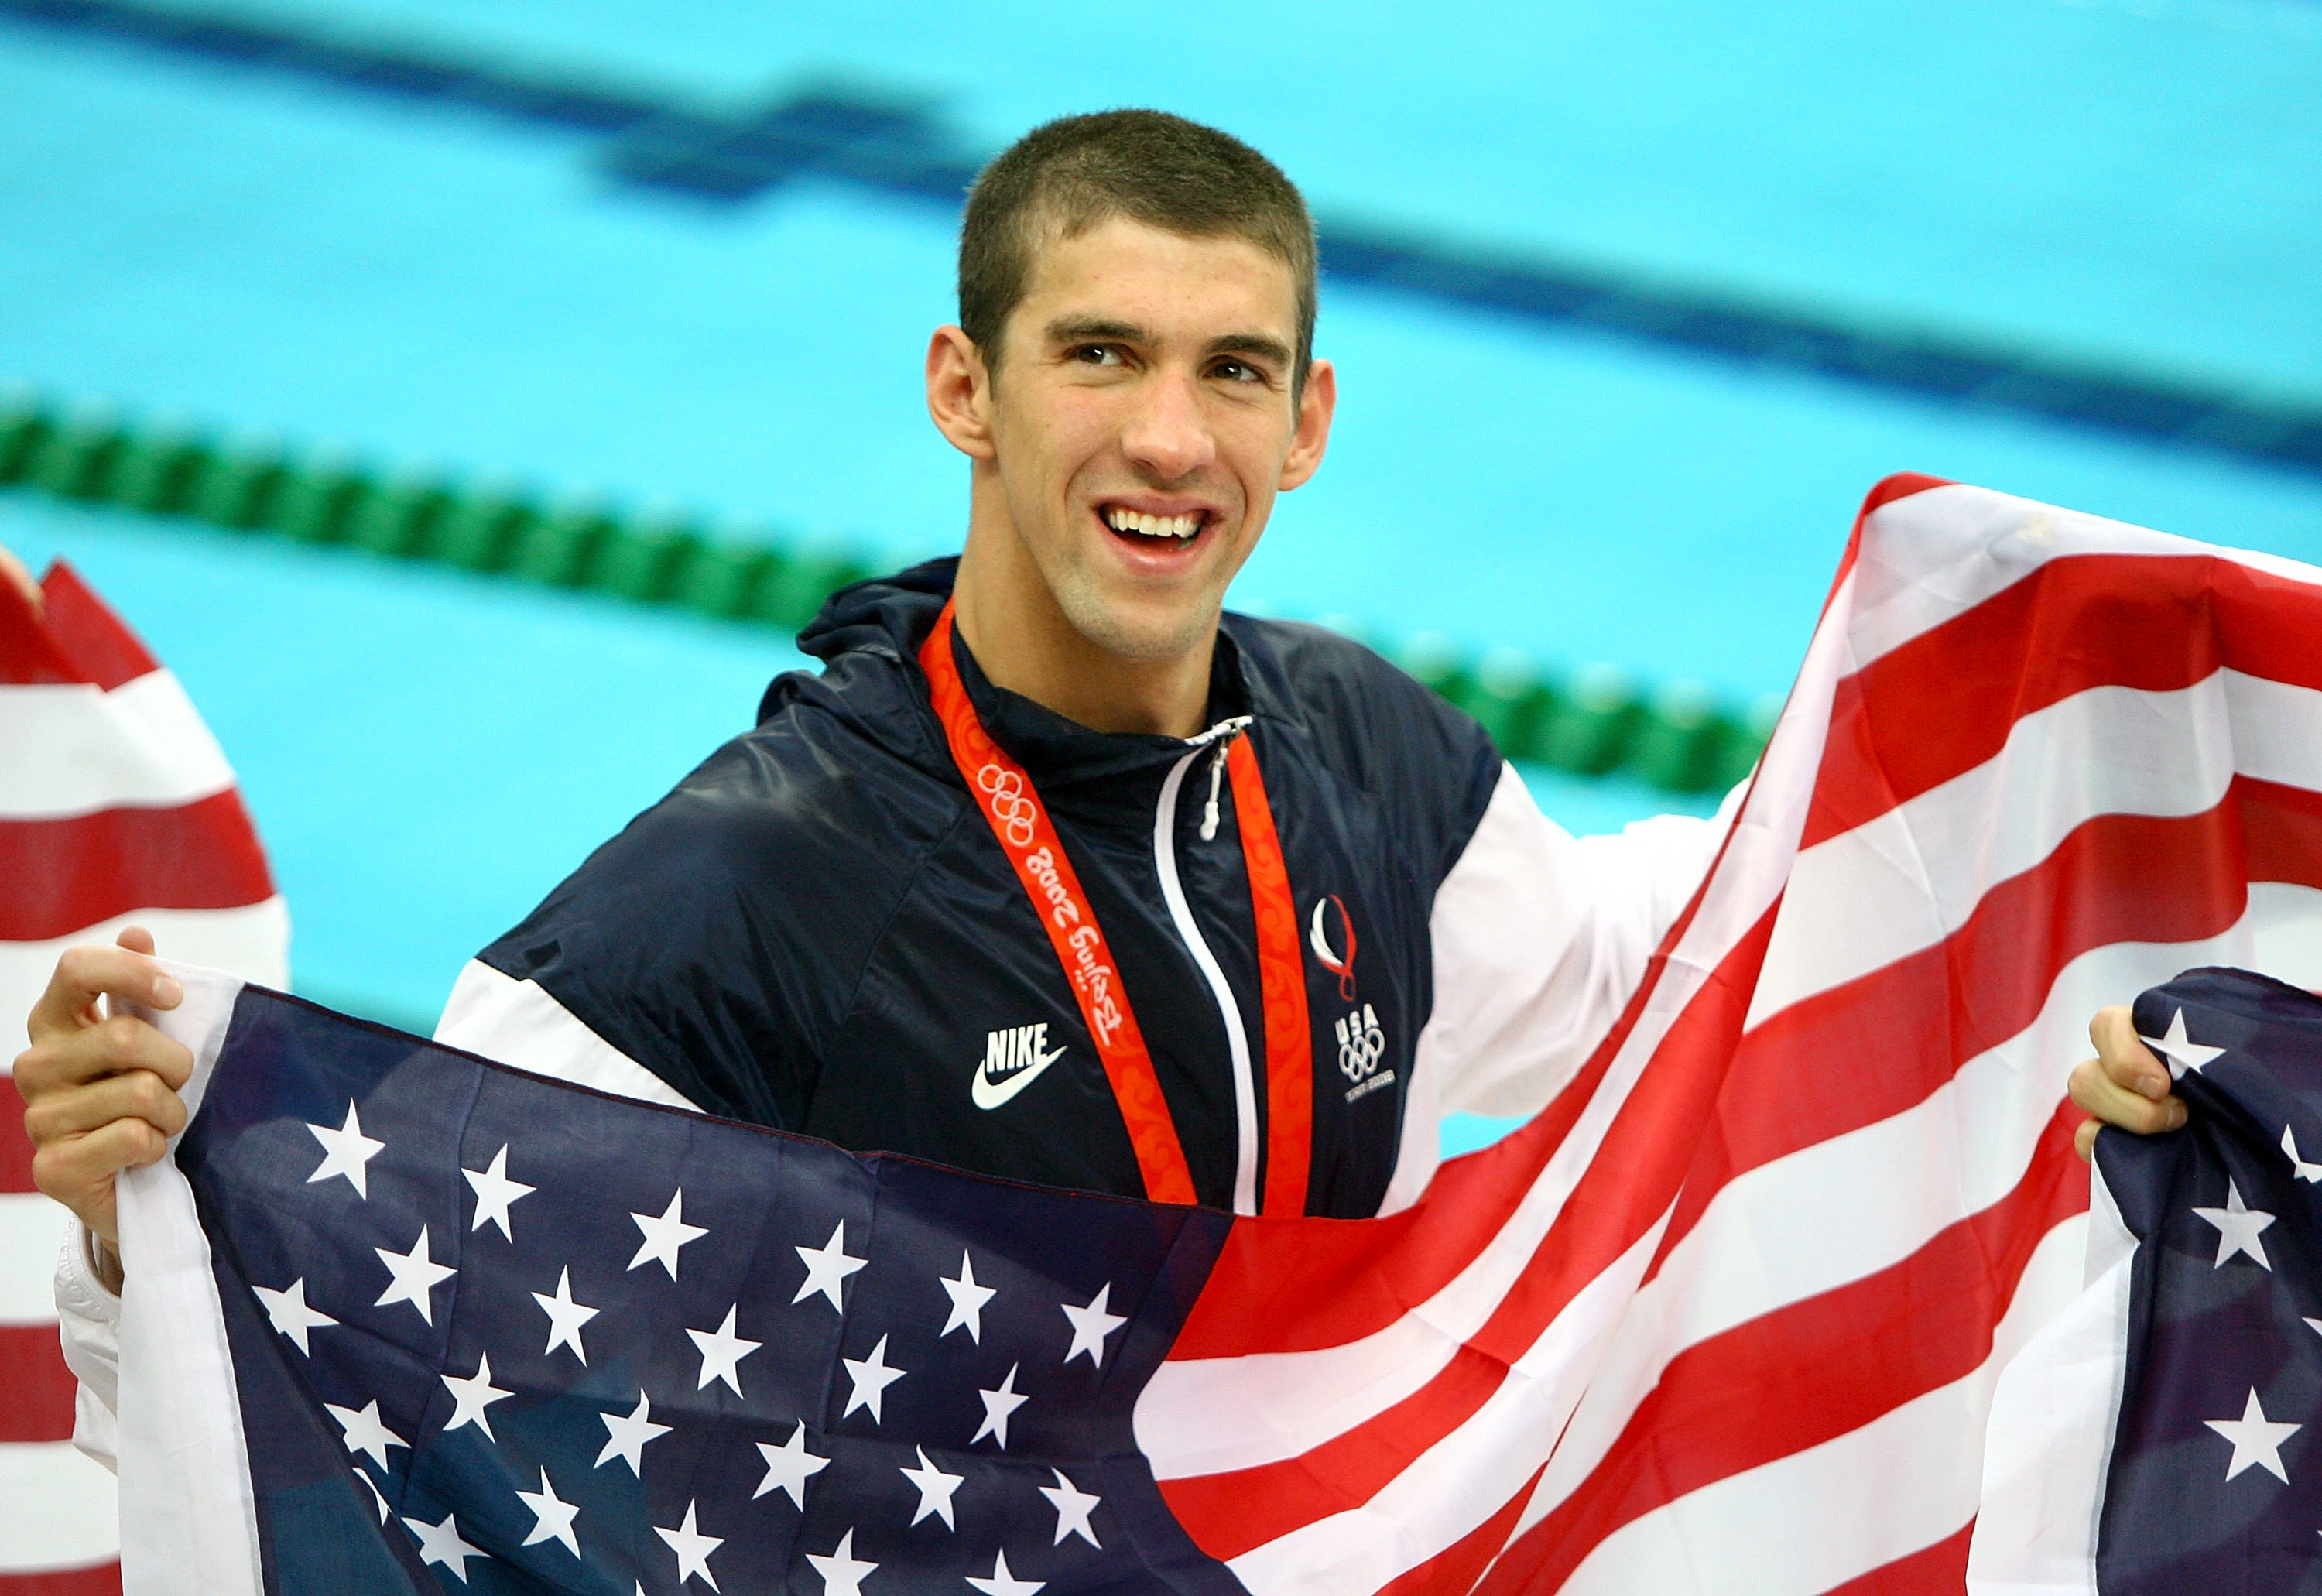 Michael Phelps proudly displays his eighth gold medal, wearing a smile and the American flag, following the Men's 4x100 Medley Relay at the Beijing 2008 Olympic Games on August 17, 2008, in Beijing, China | Source: Getty Images